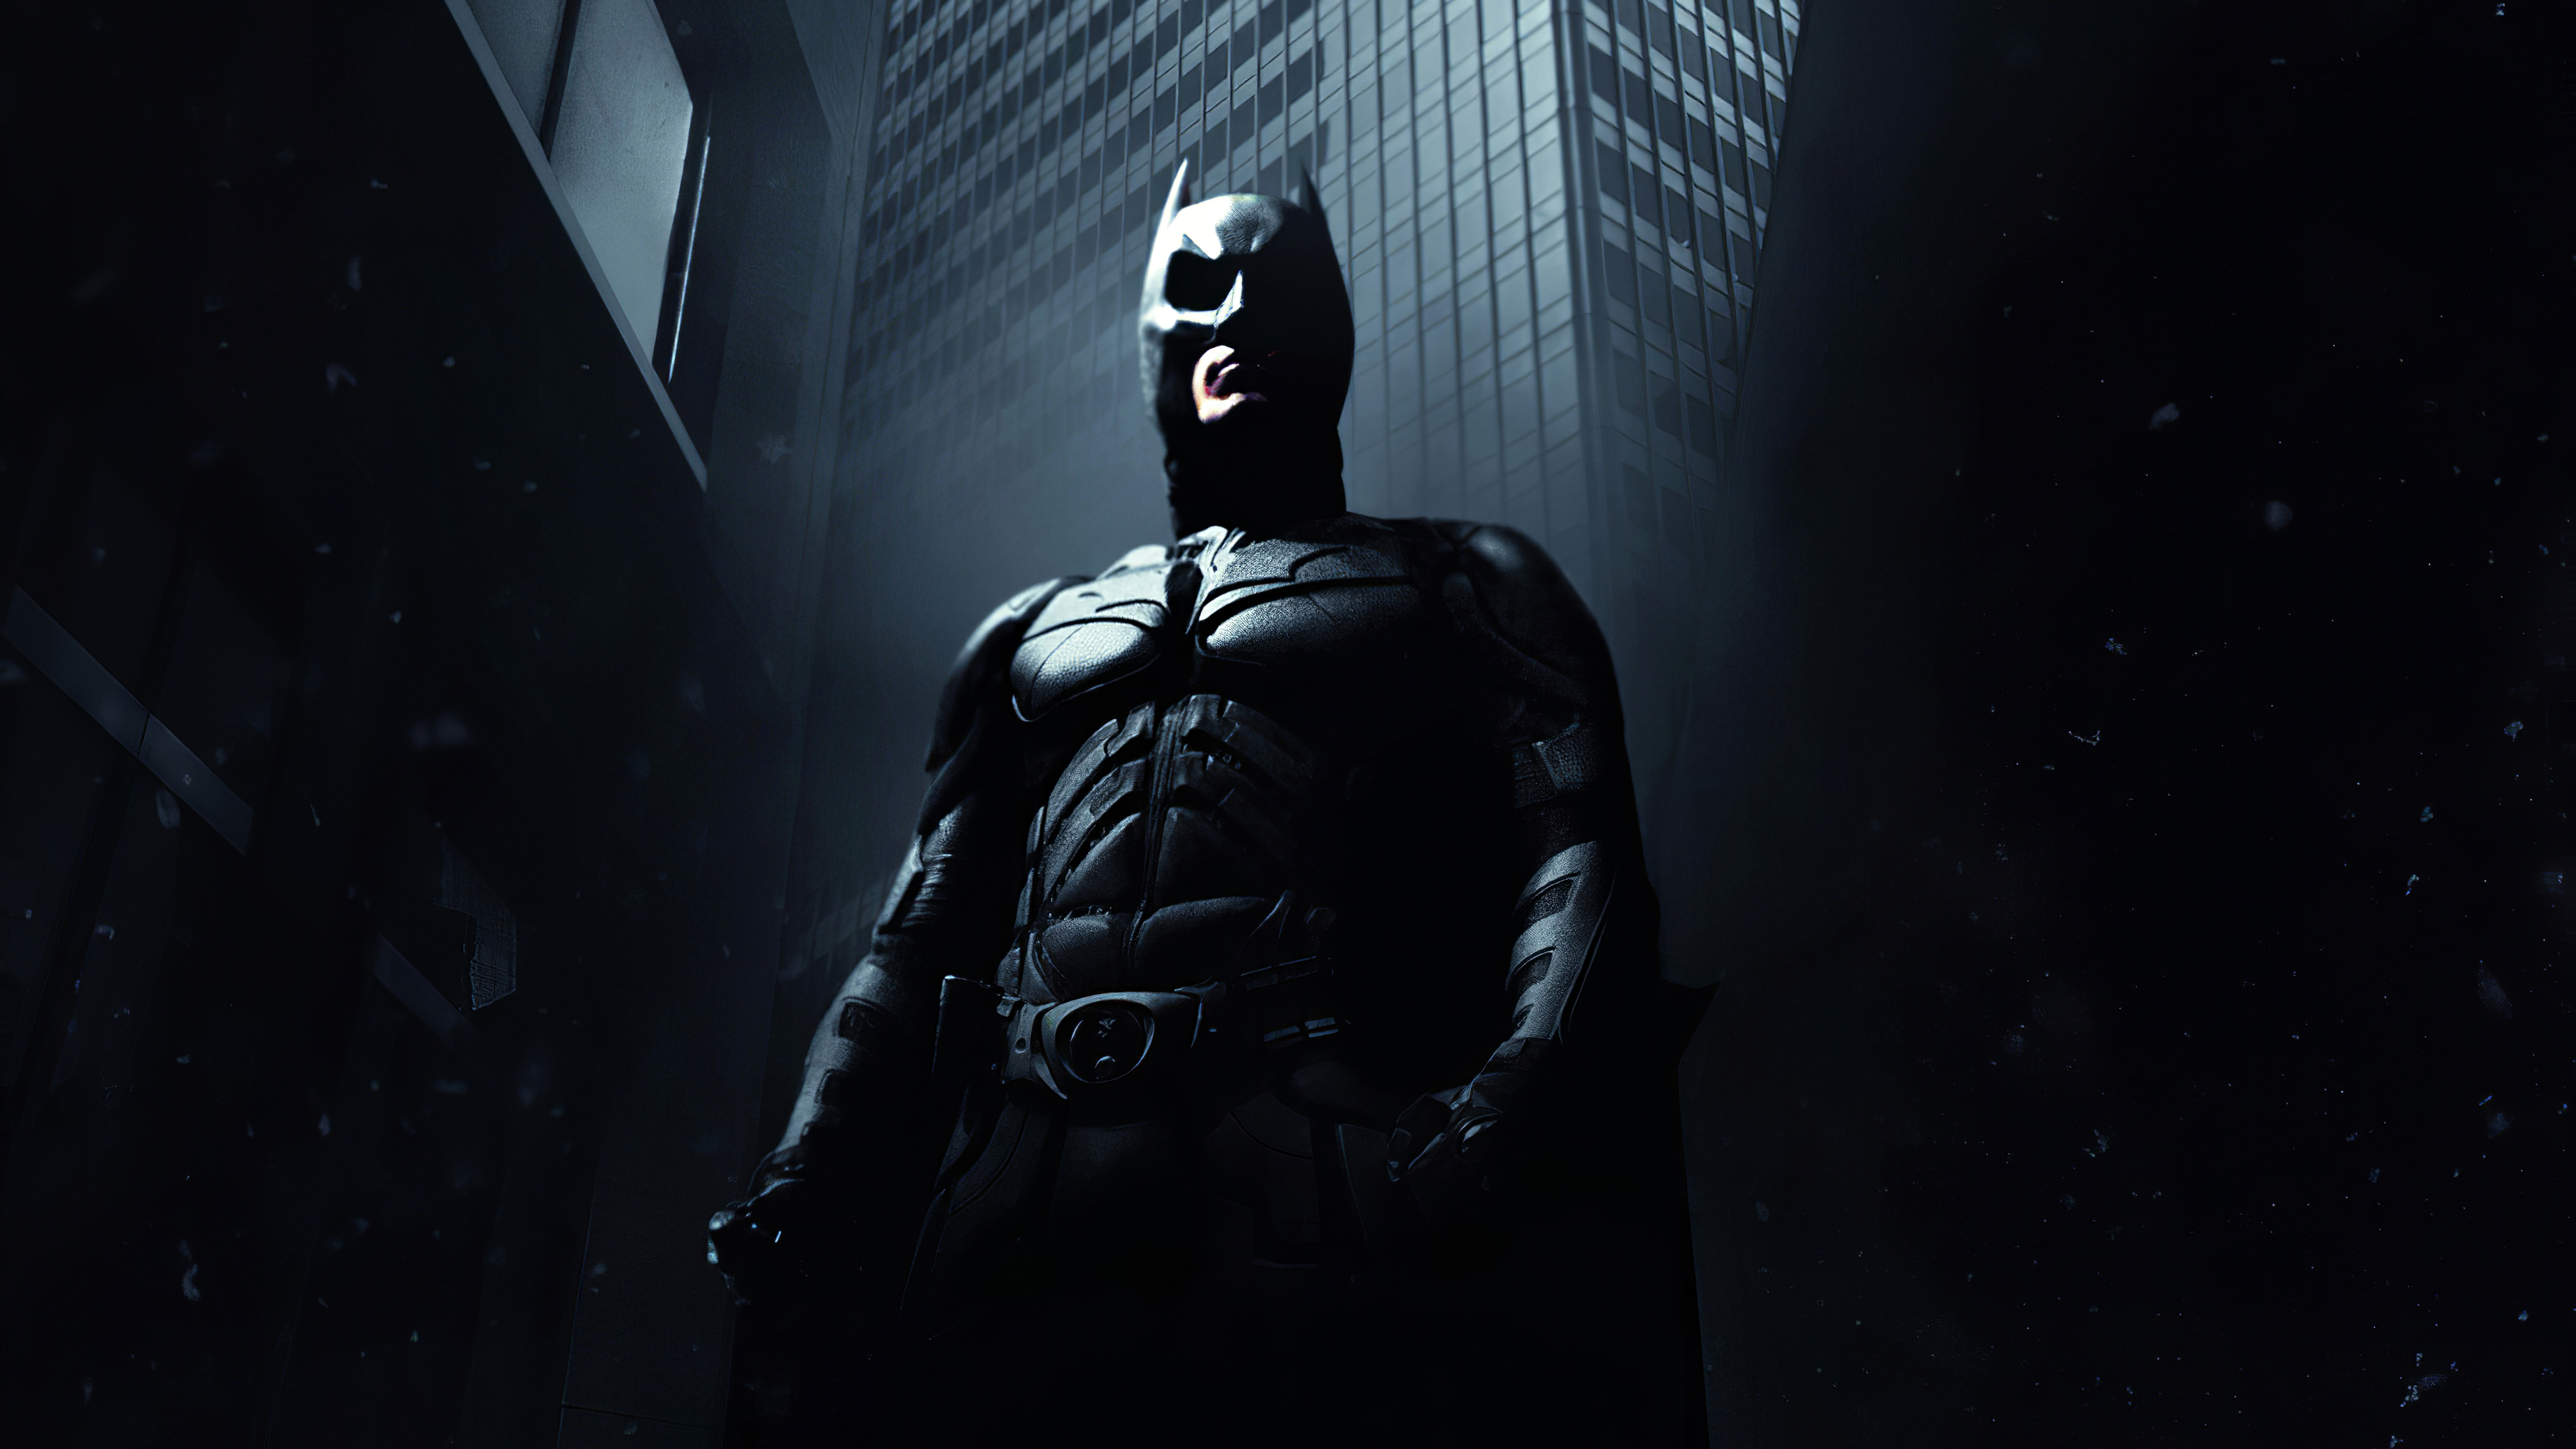 The Dark Knight Batman Movies HD Wallpaper on fine art paper 13x19 Fine Art  Print - Art & Paintings posters in India - Buy art, film, design, movie,  music, nature and educational